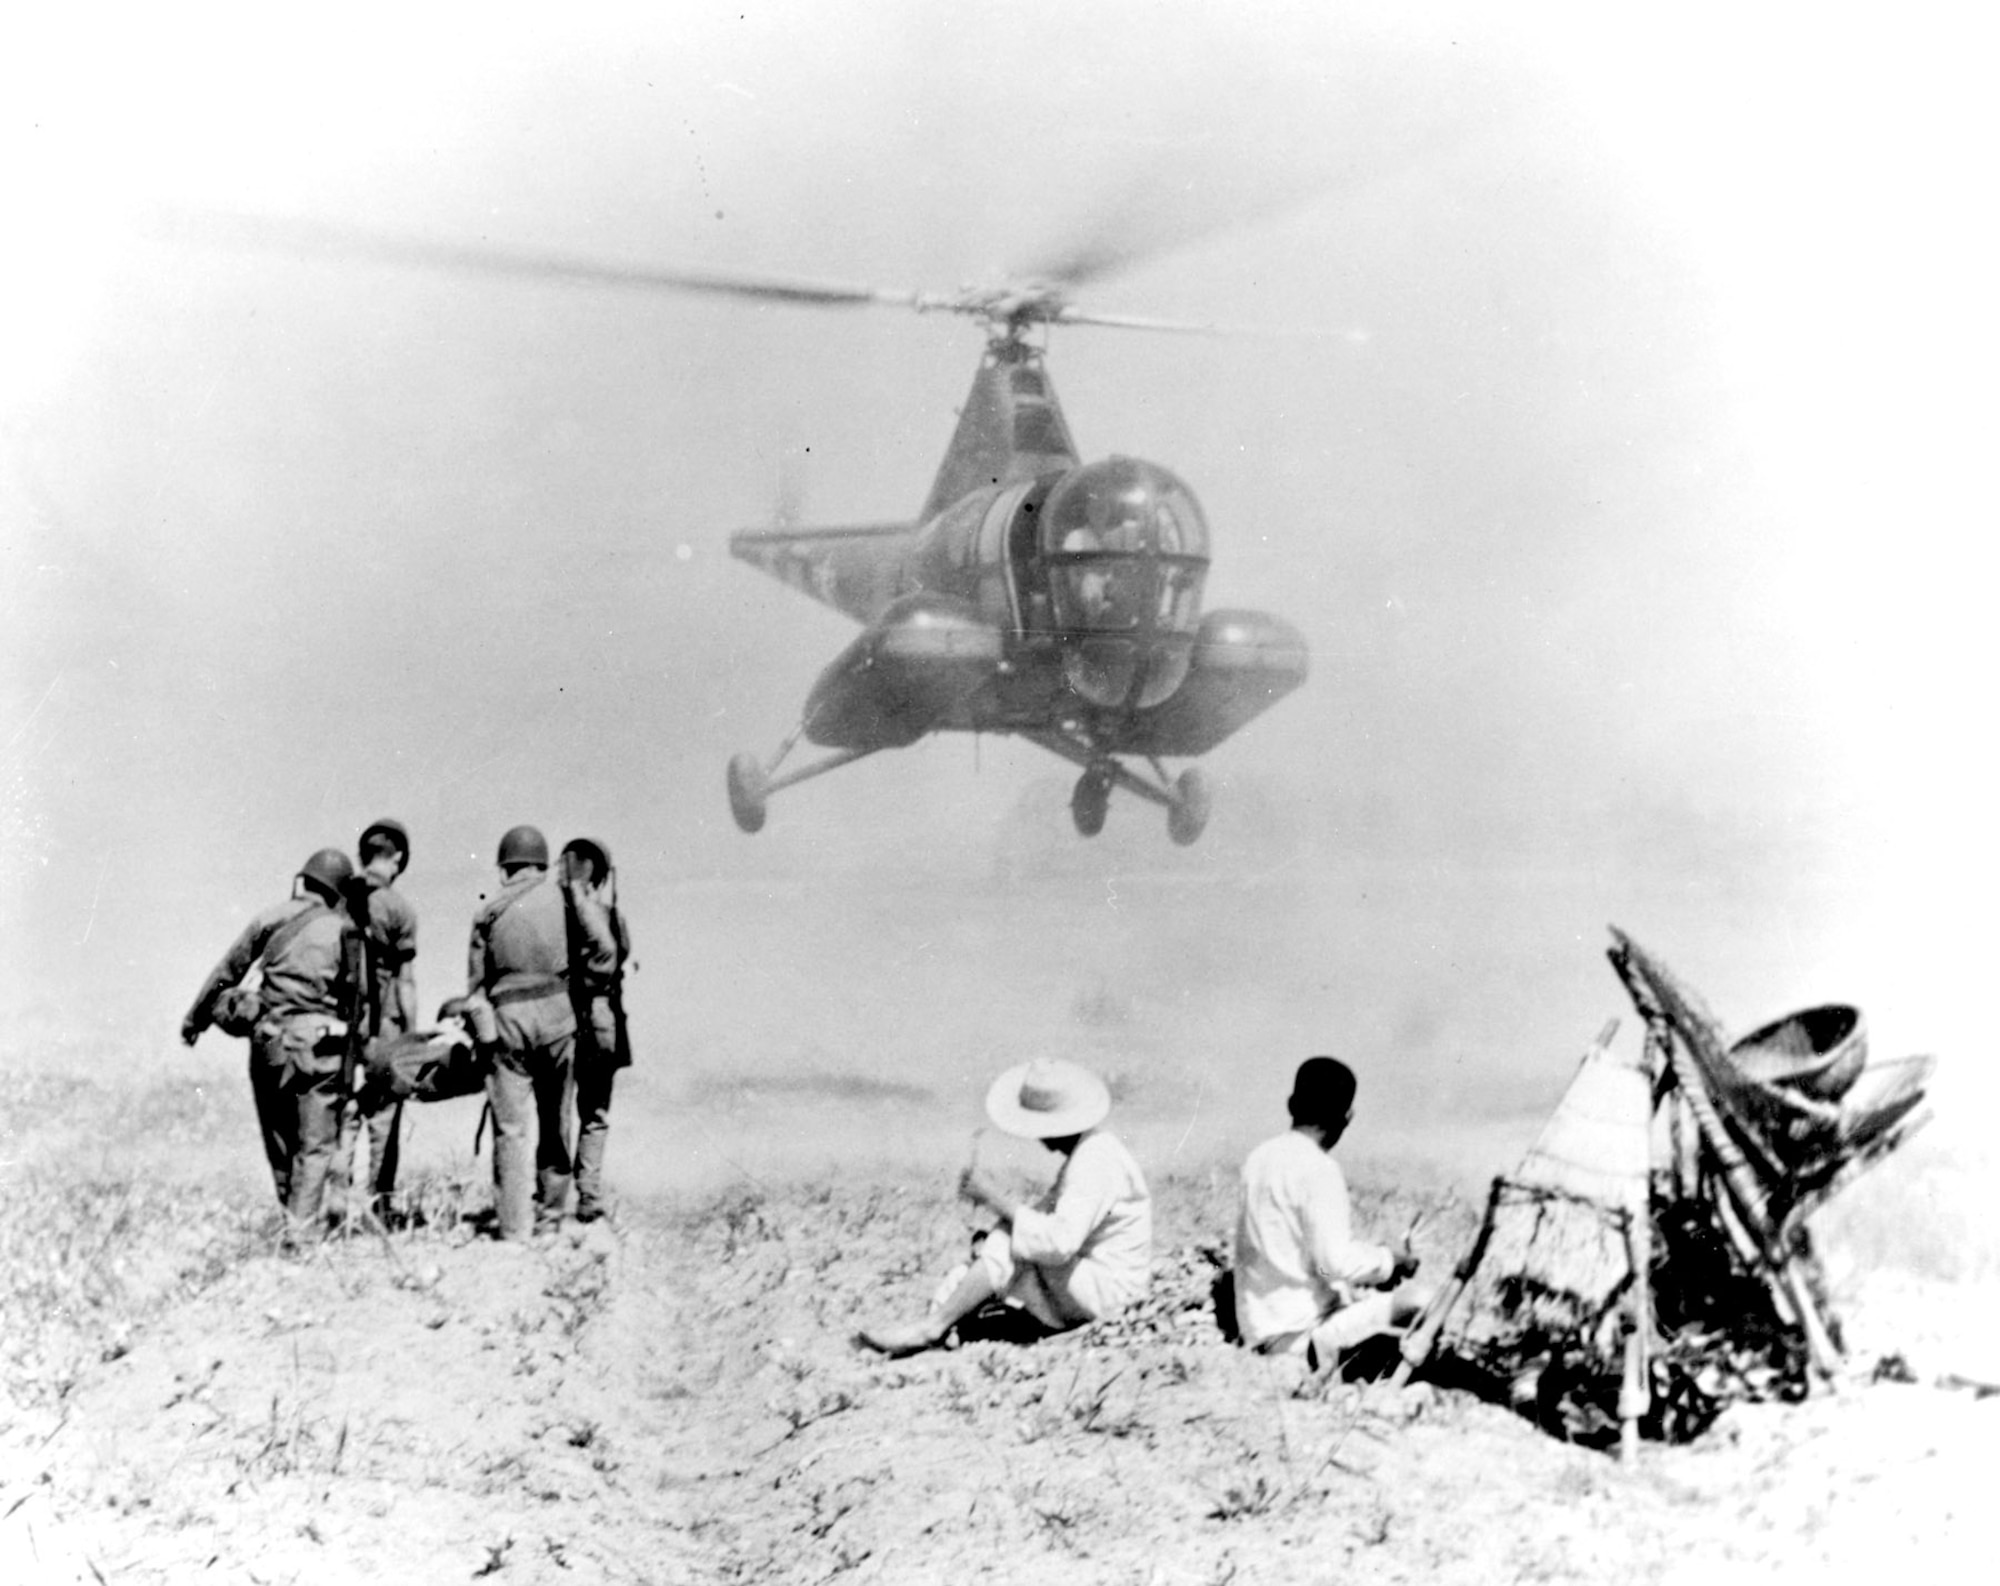 An Air Force H-5G fitted with two stretchers prepares to evacuate a wounded soldier, July 1951. (U.S. Air Force photo)